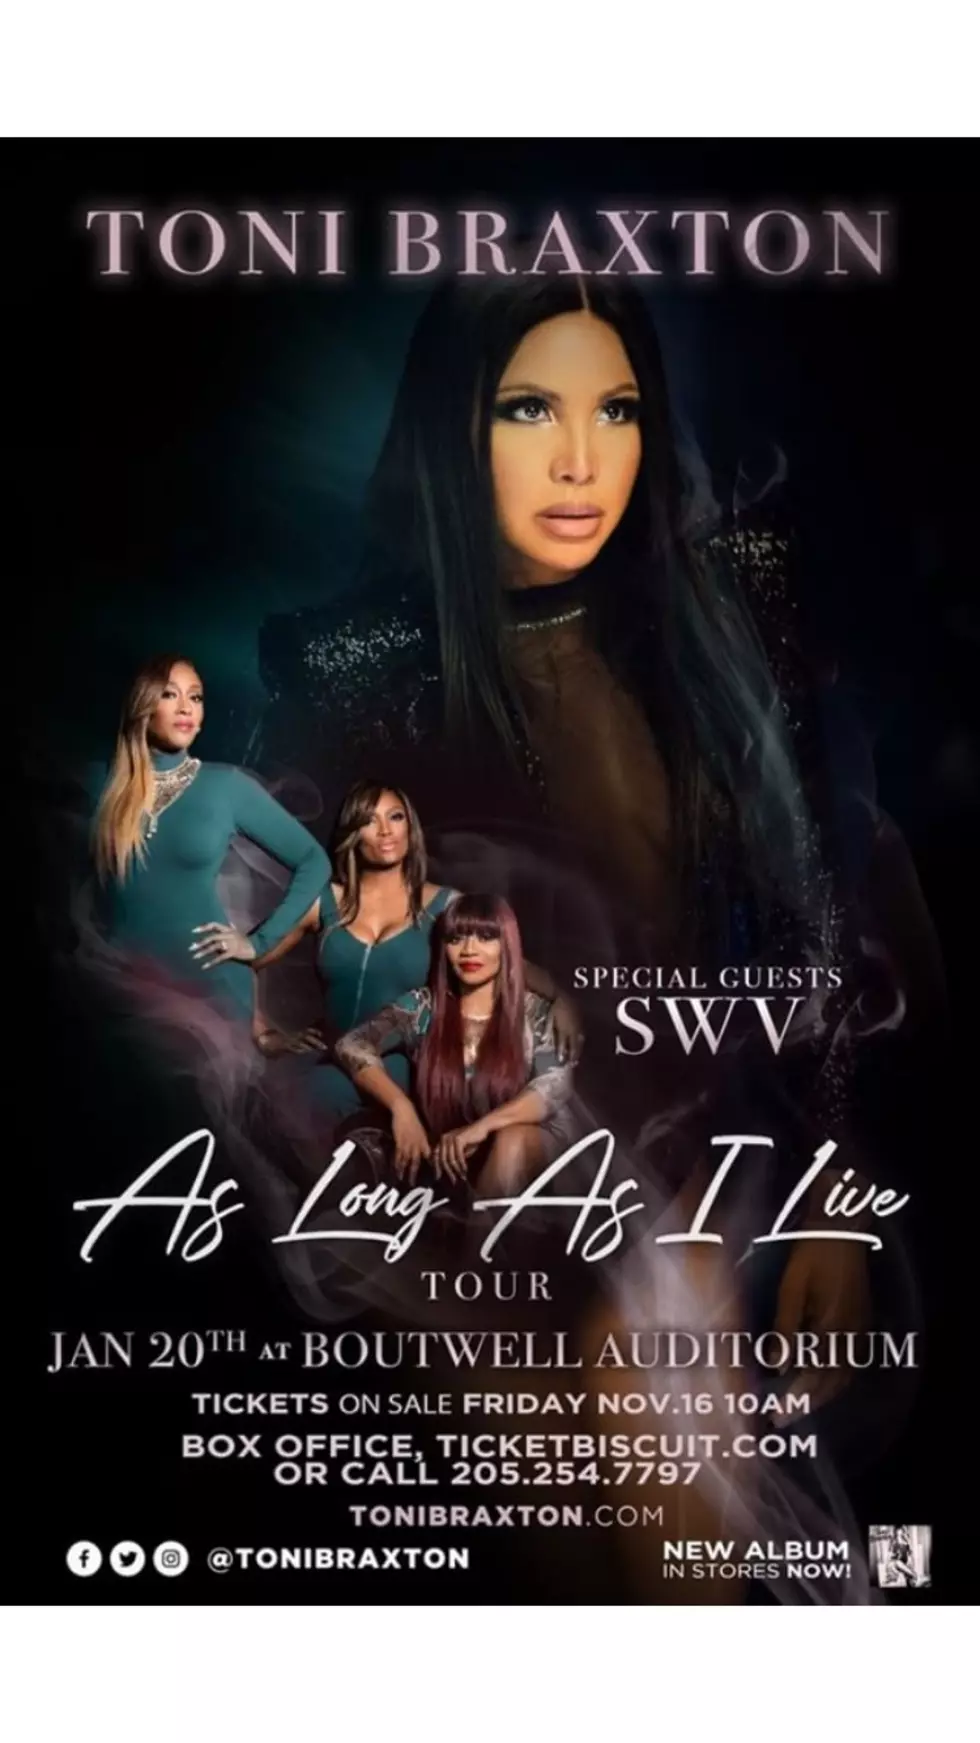 Win Tickets to See Toni Braxton and SWV!